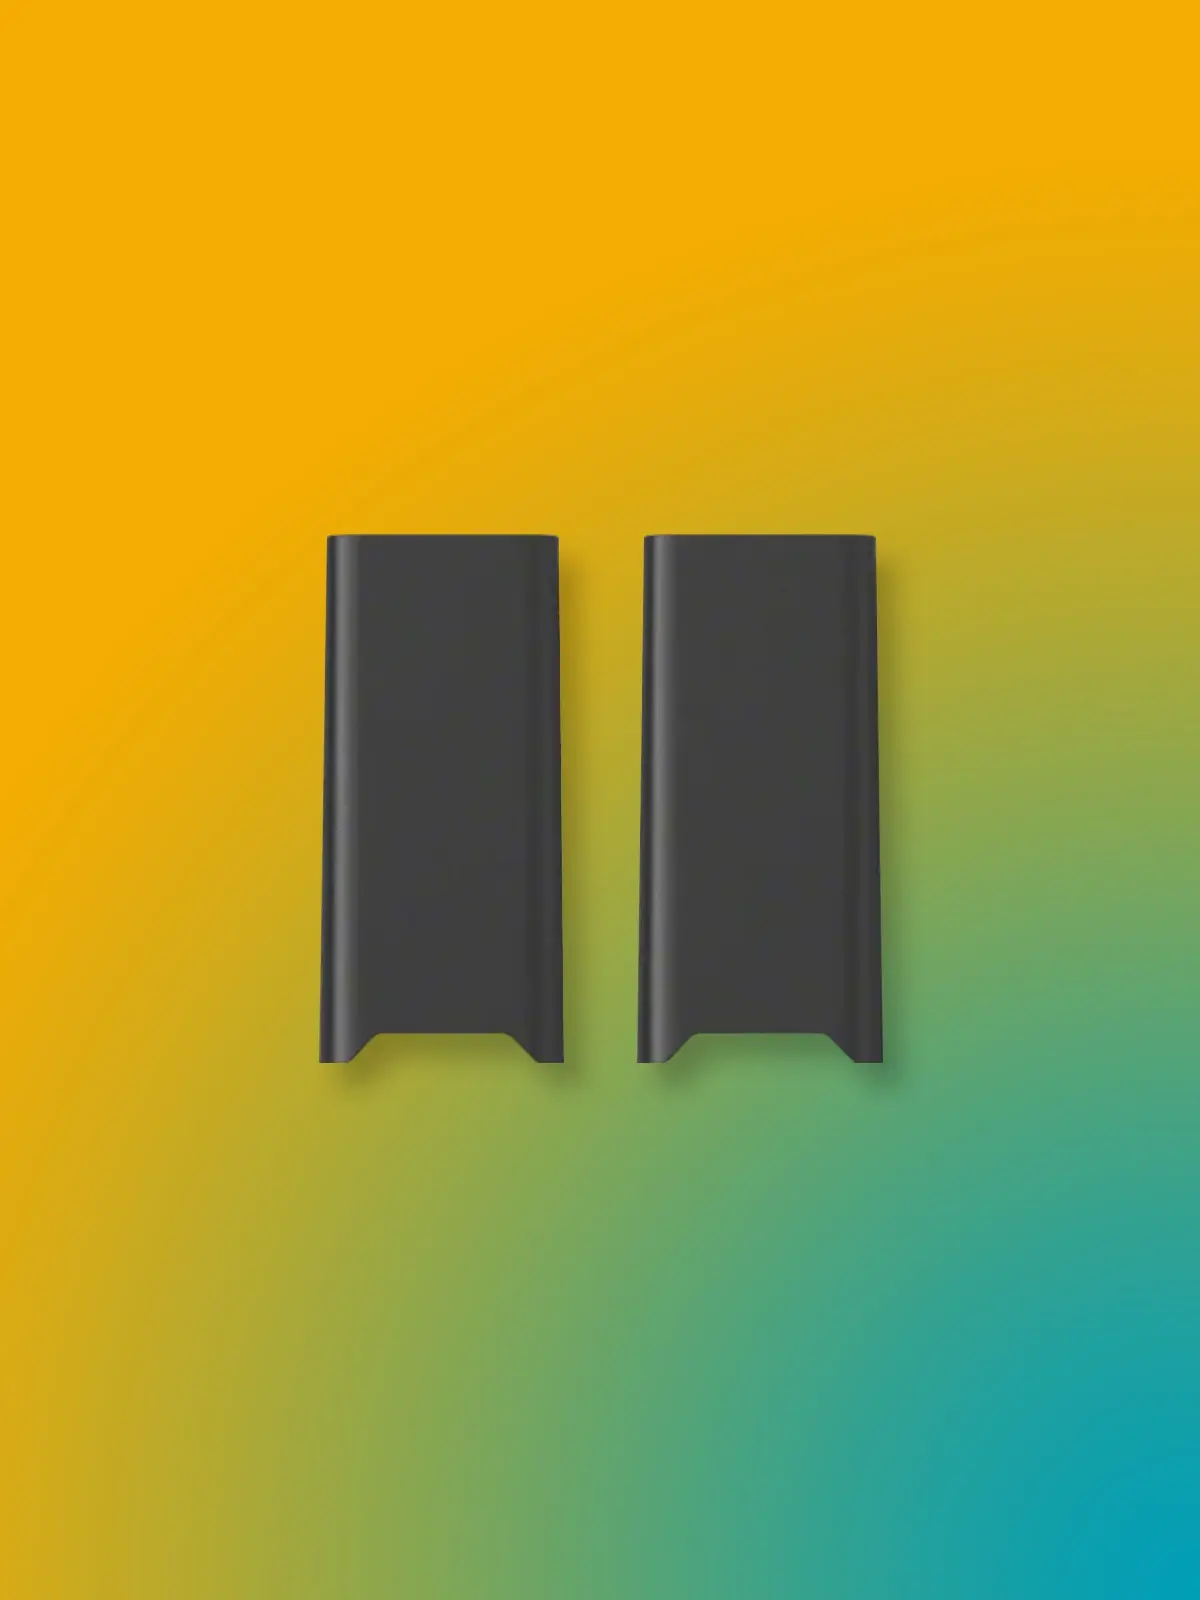 Two JUUL2 pods side-by-side in front of a gradient background with orange-yellow, green and blue